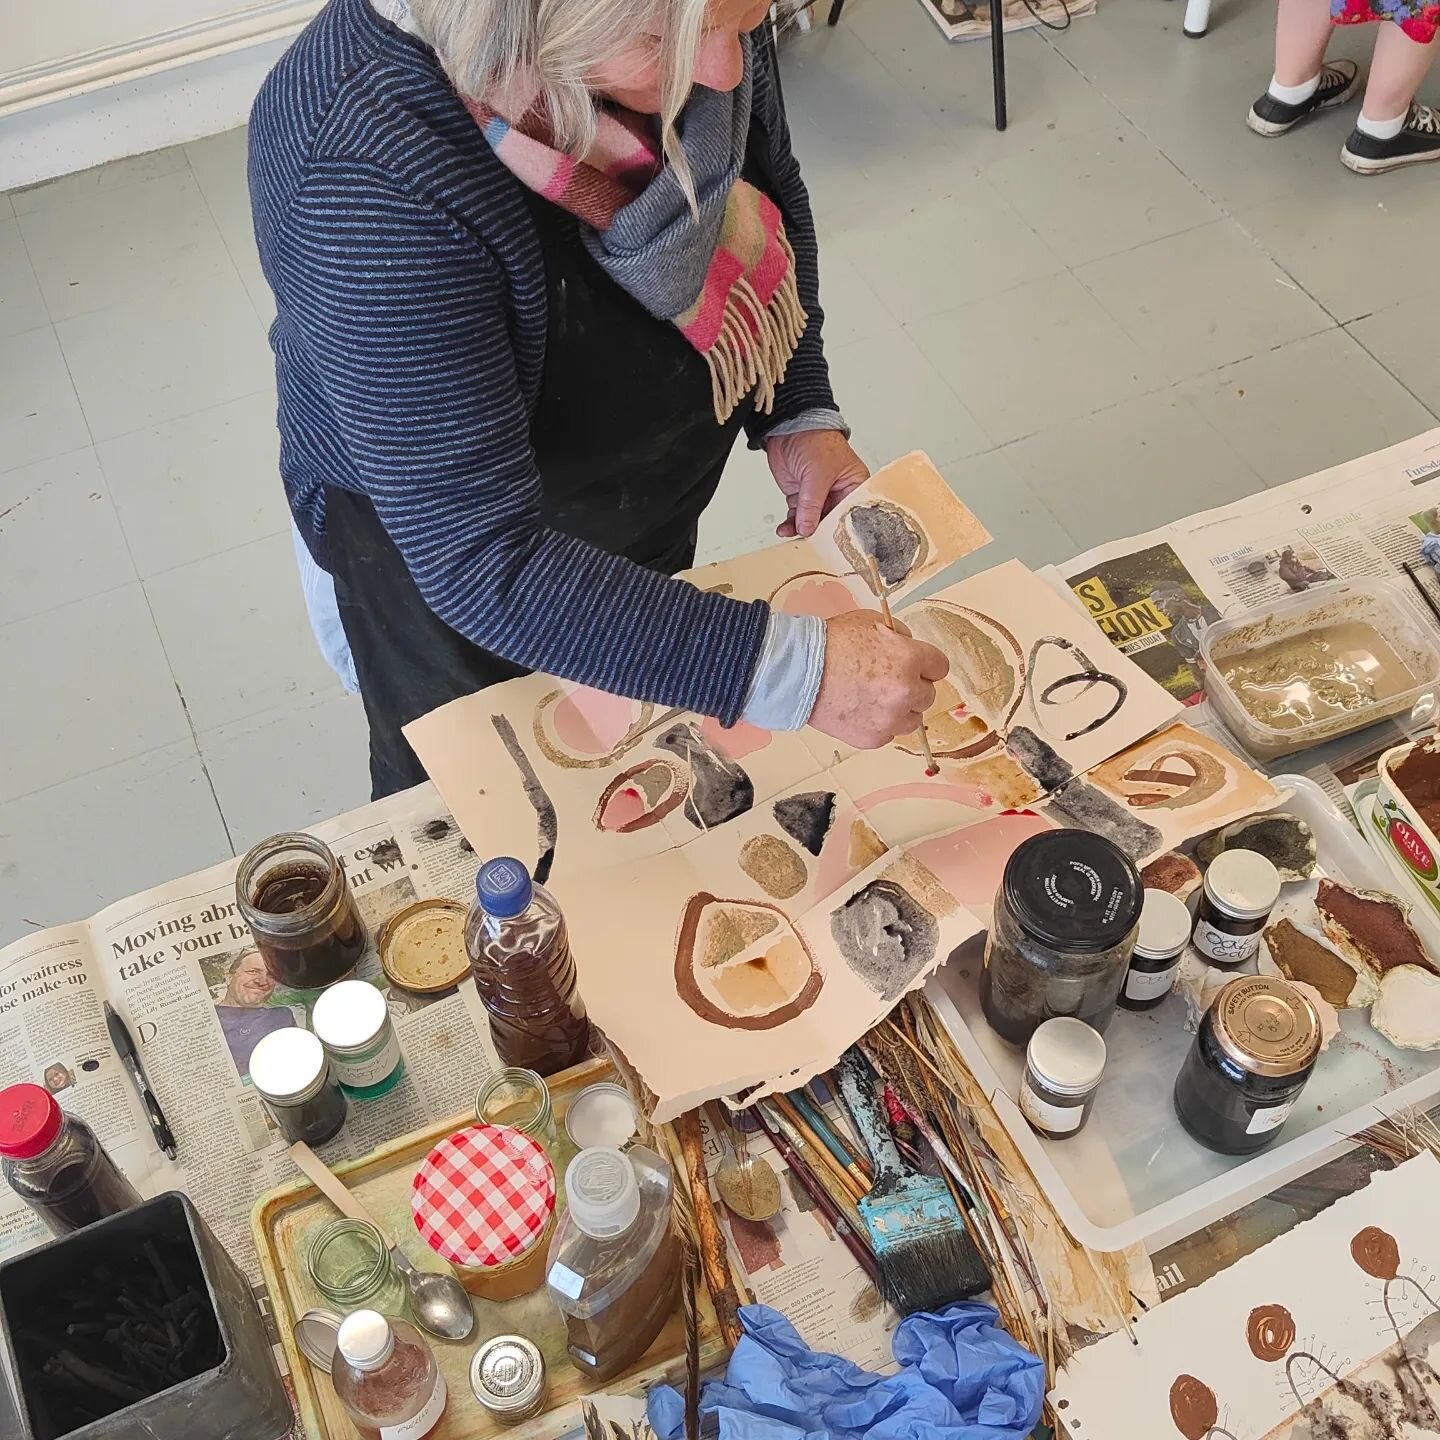 On until 4pm today at GROW! Join Beverley and collaborators @therealvivspencer and @drawnoutinon to create, play and explore the practices of painting, charcoal drawing, printing, dyeing and weaving. All materials are natural, upcycled, found or from